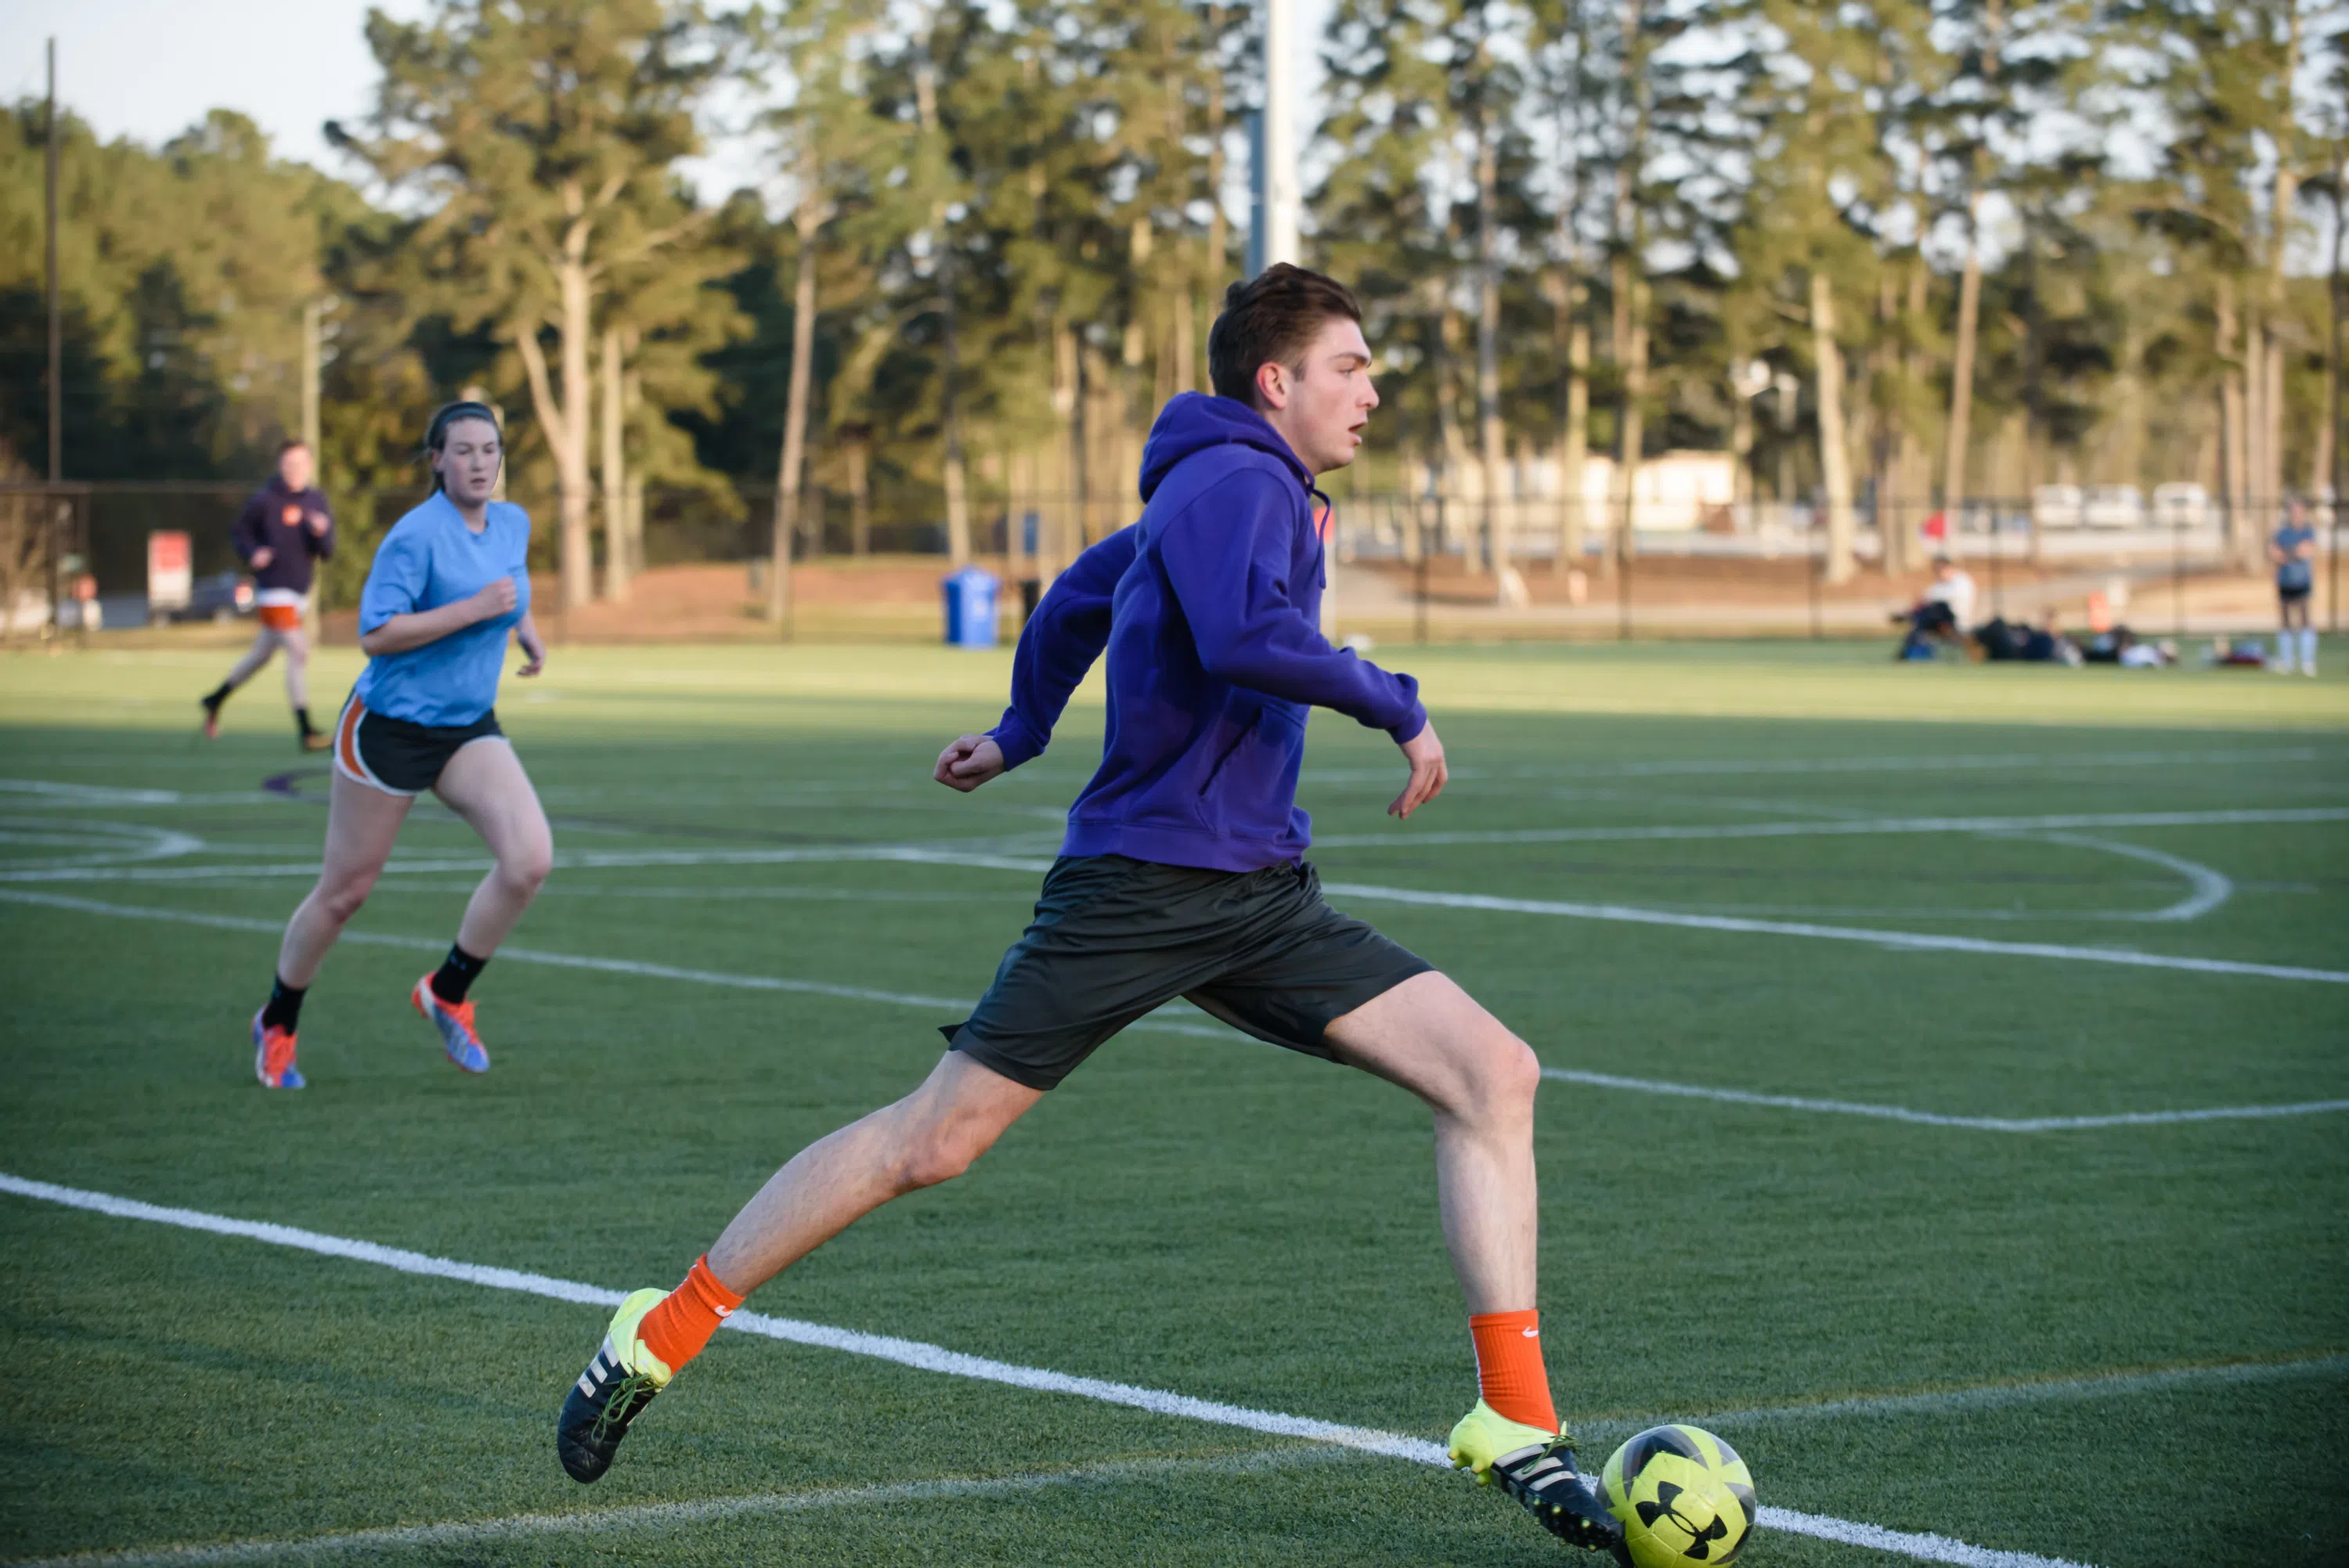 Clemson students enjoy playing club and intramural soccer at the Snow Outdoor Fitness and Wellness Complex.